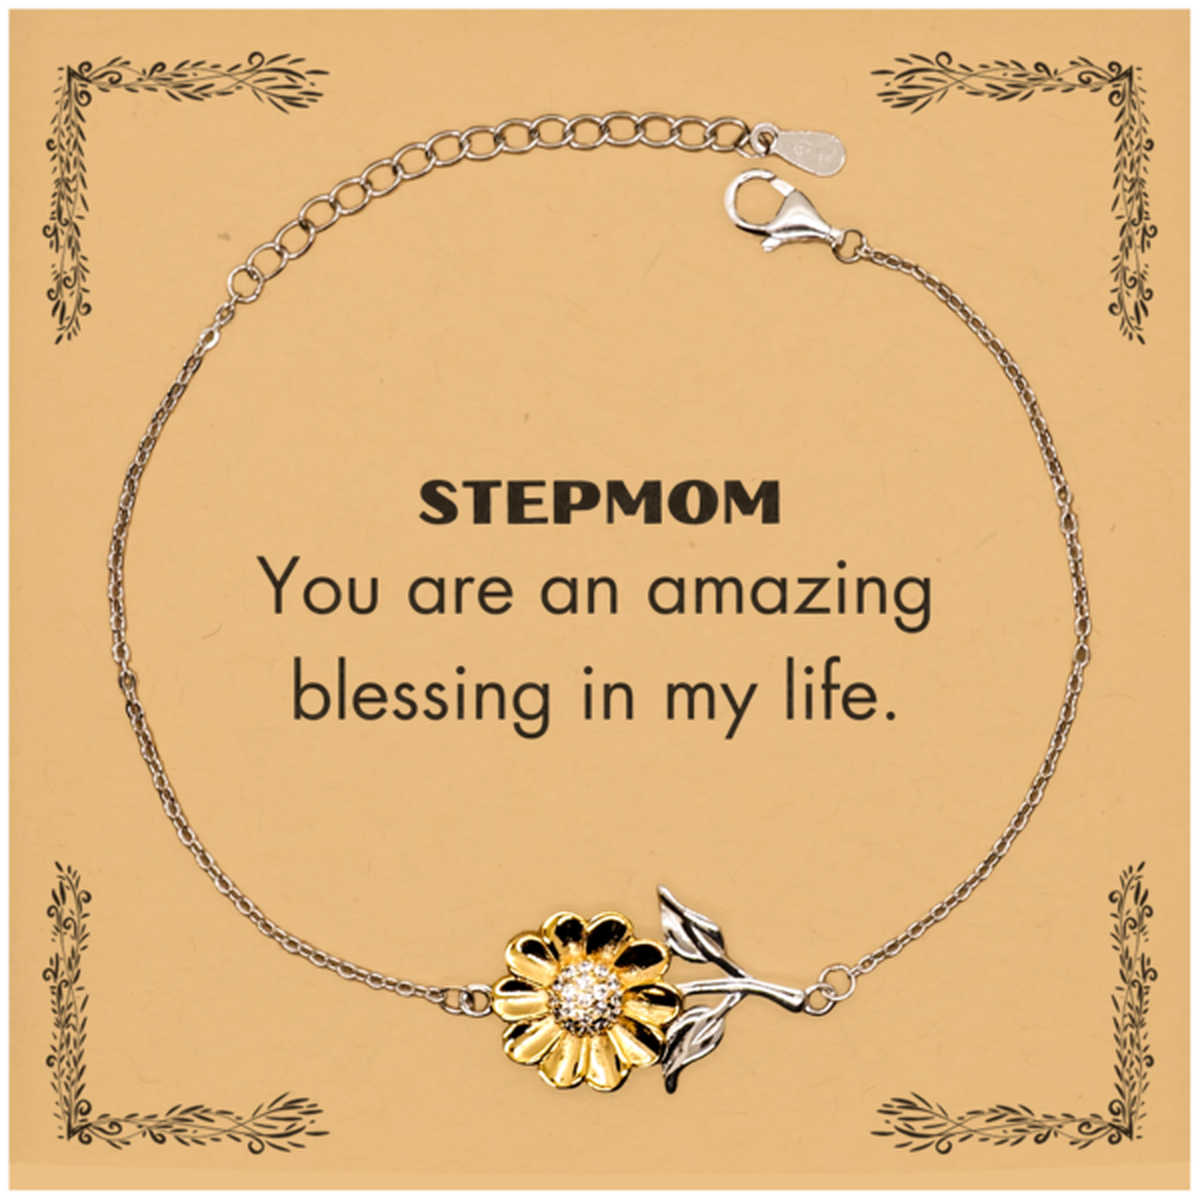 Stepmom Sunflower Bracelet, You are an amazing blessing in my life, Thank You Gifts For Stepmom, Inspirational Birthday Christmas Unique Gifts For Stepmom